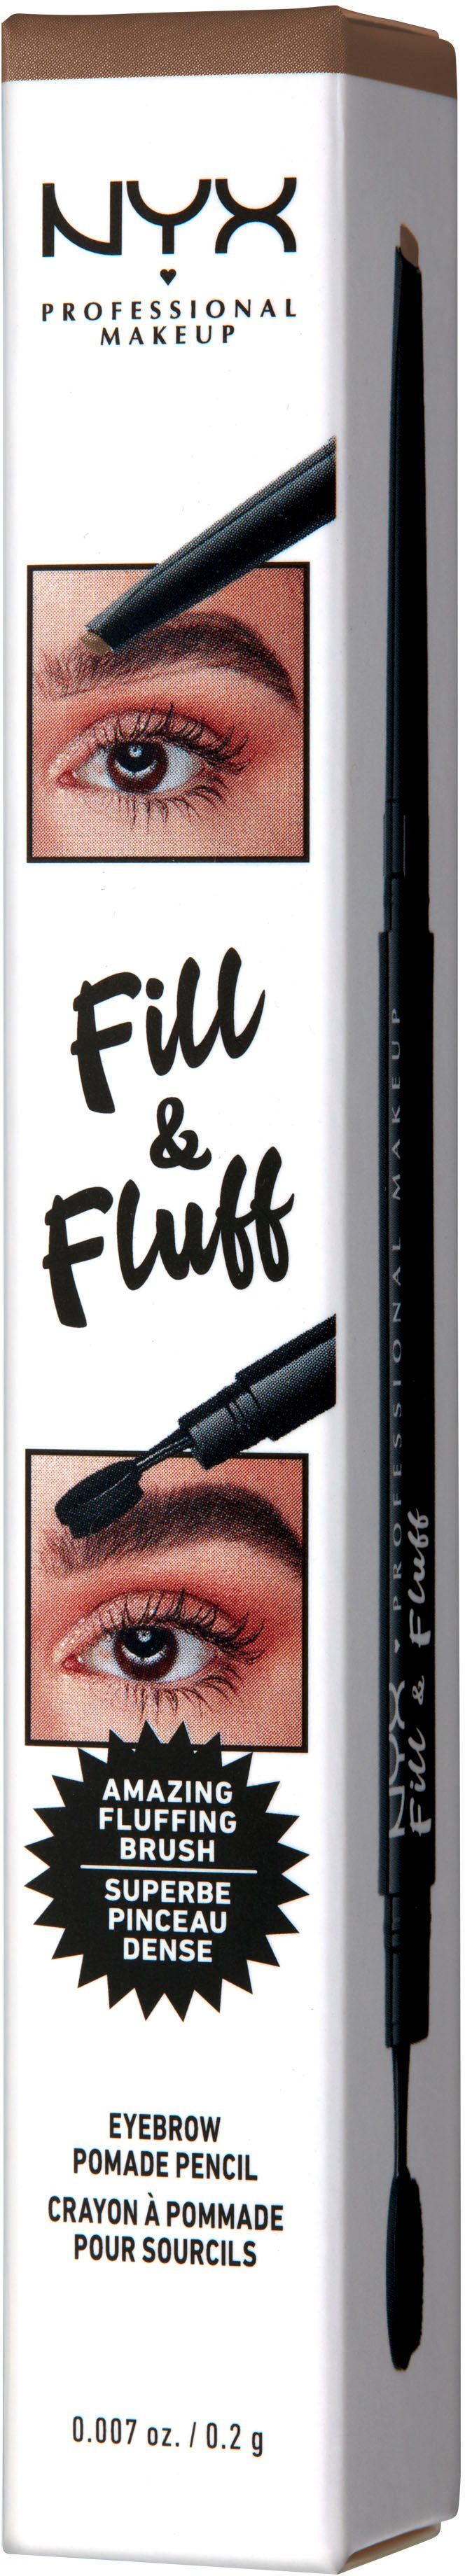 NYX Augenbrauen-Stift Makeup Fluff Pomade Eyebrow taupe Fill & Pencil Professional